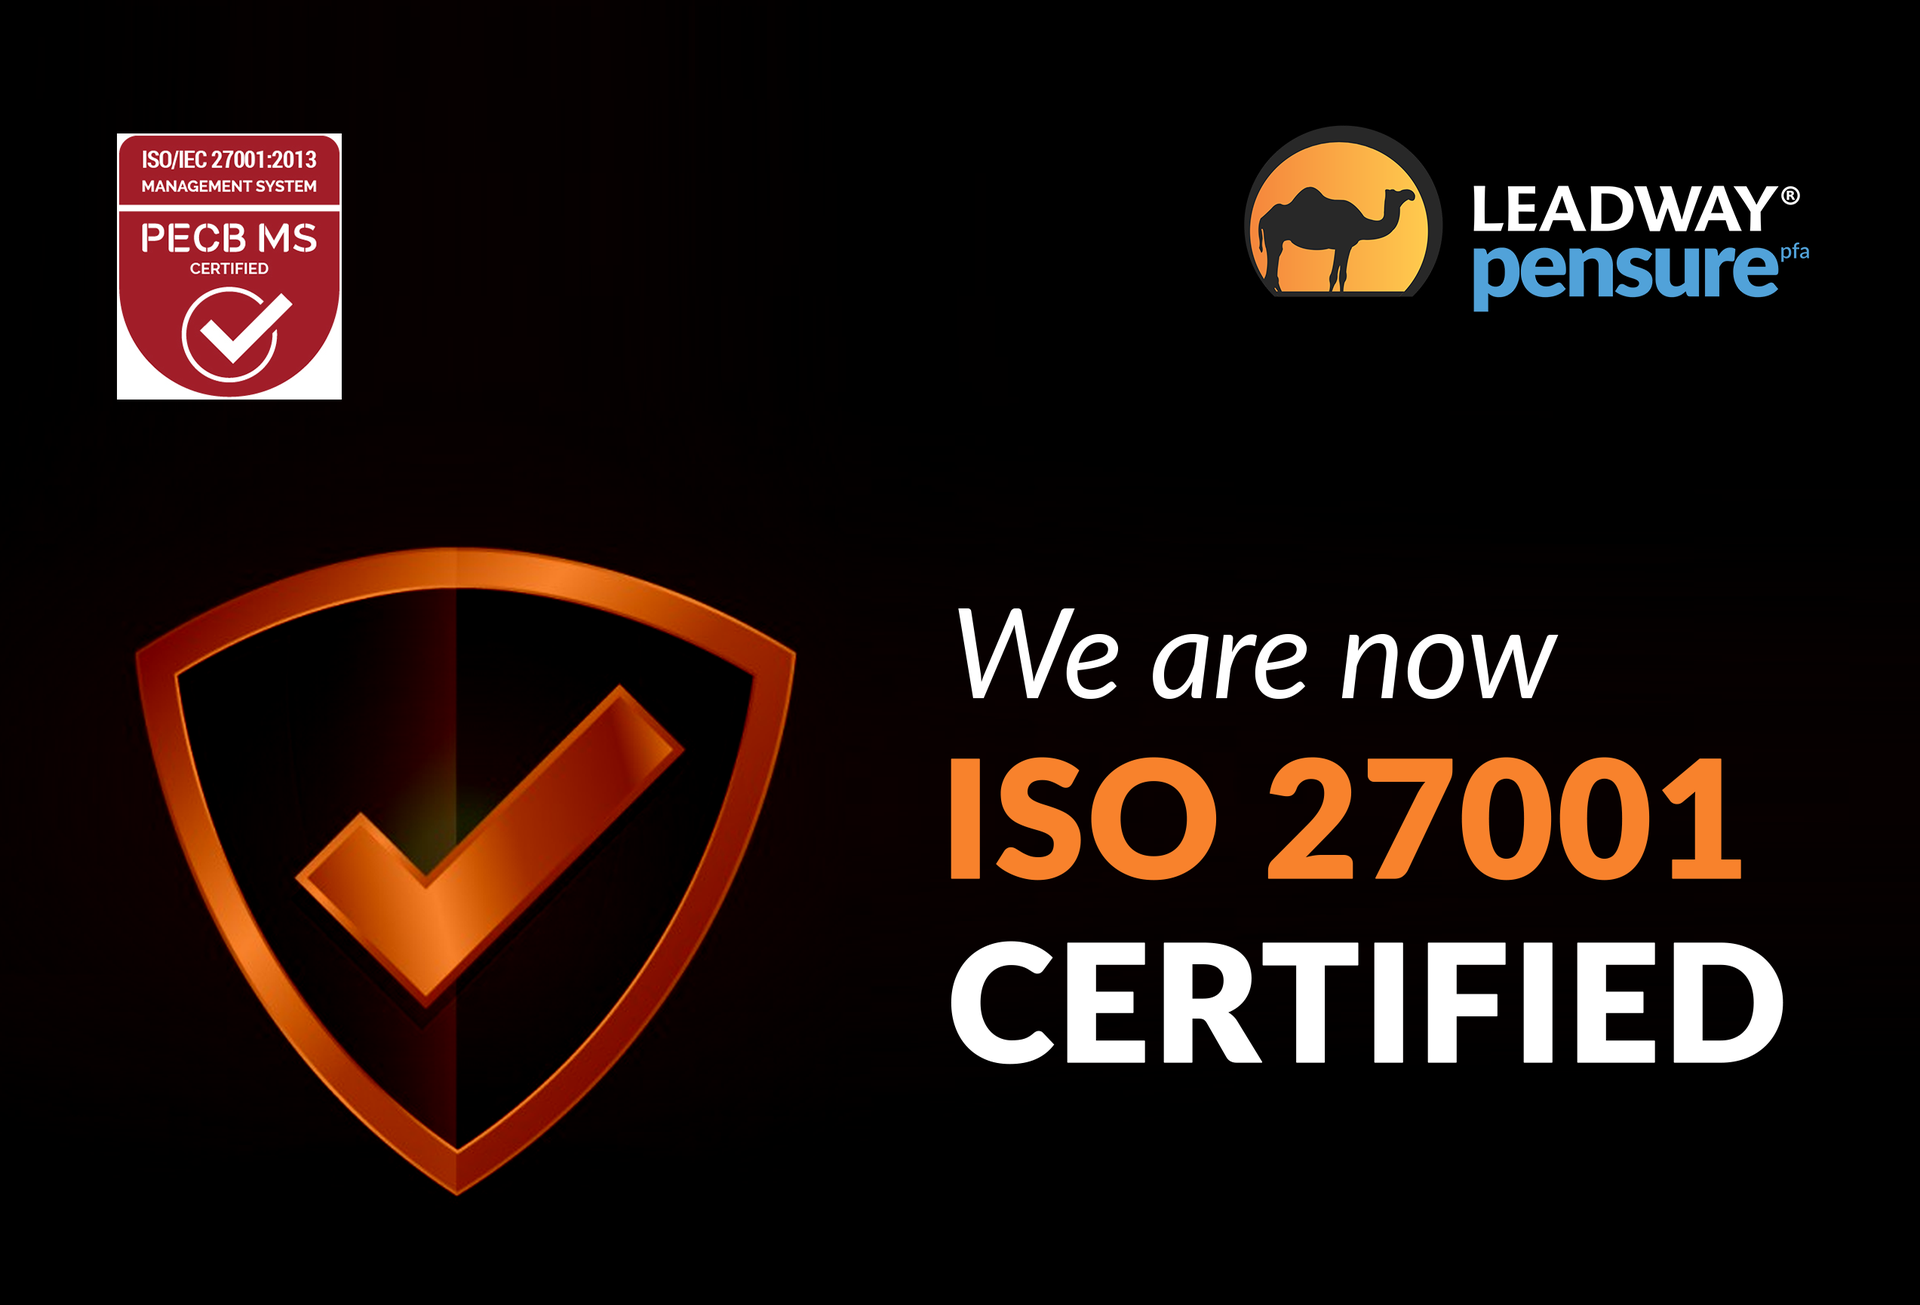 Leadway Pensure Attains ISO 27001 Certification